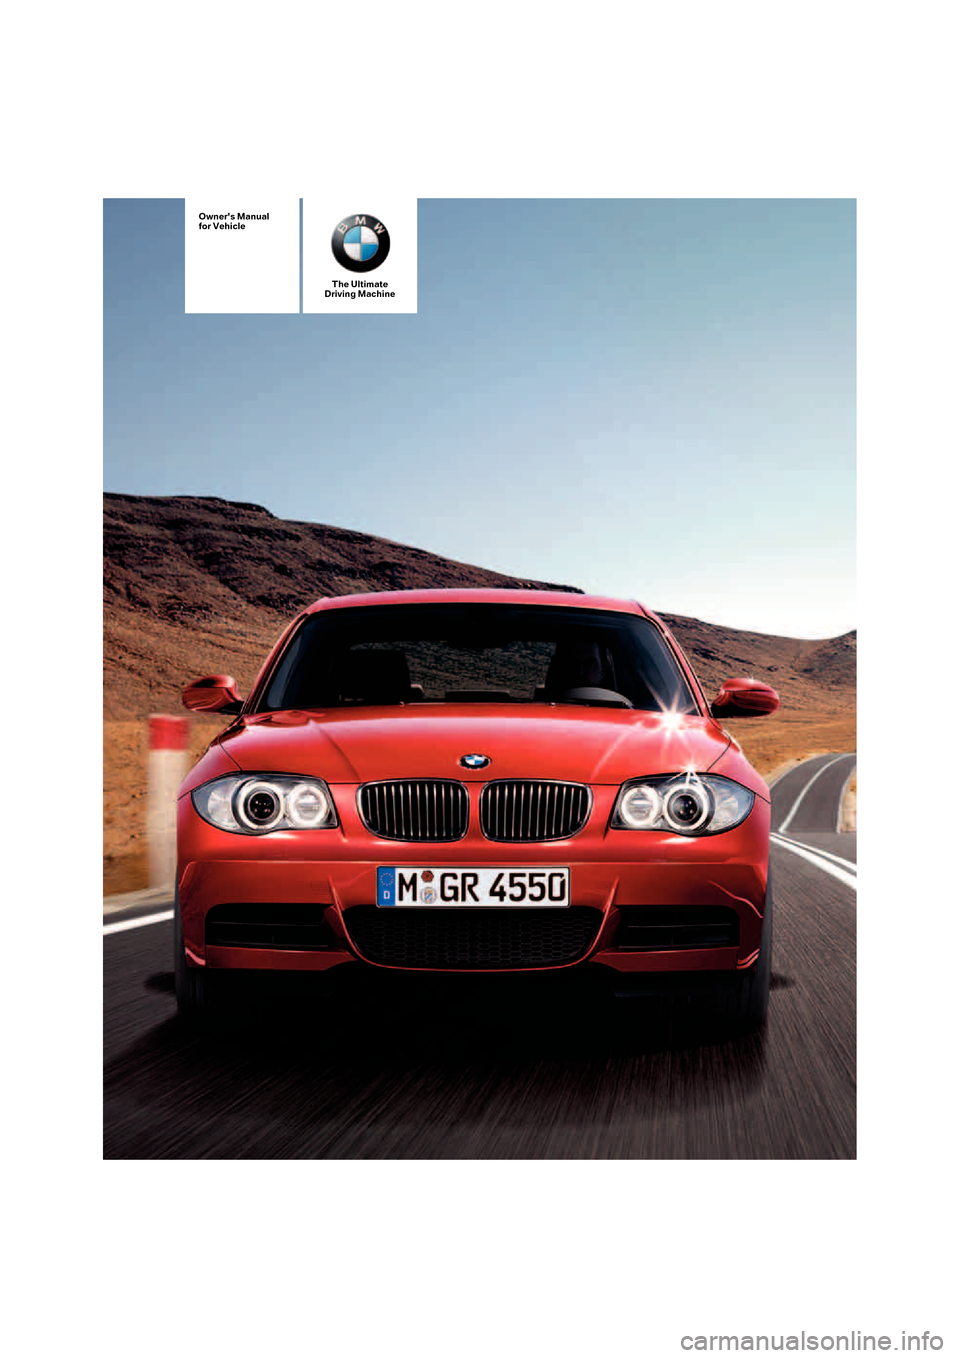 BMW 128I COUPE 2008 E82 Owners Manual The Ultimate
Driving Machine
Owners Manual
for Vehicle 